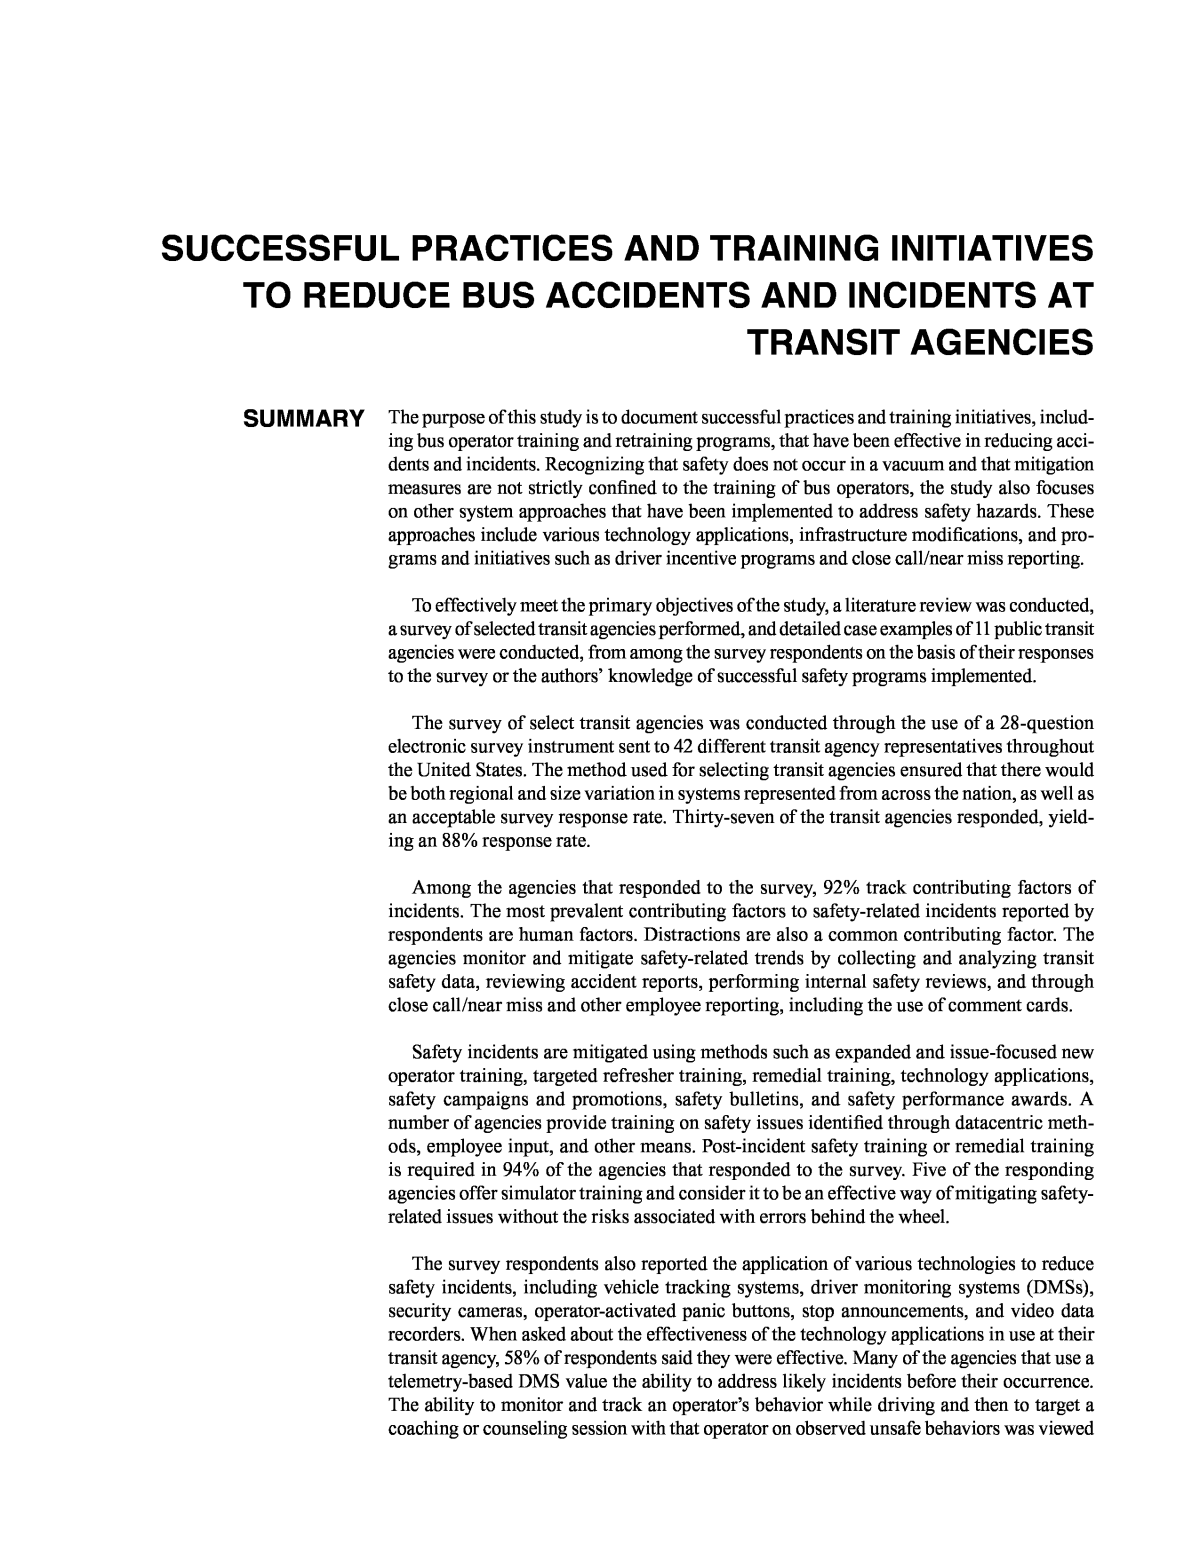 Report Contents  Successful Practices and Training Initiatives to